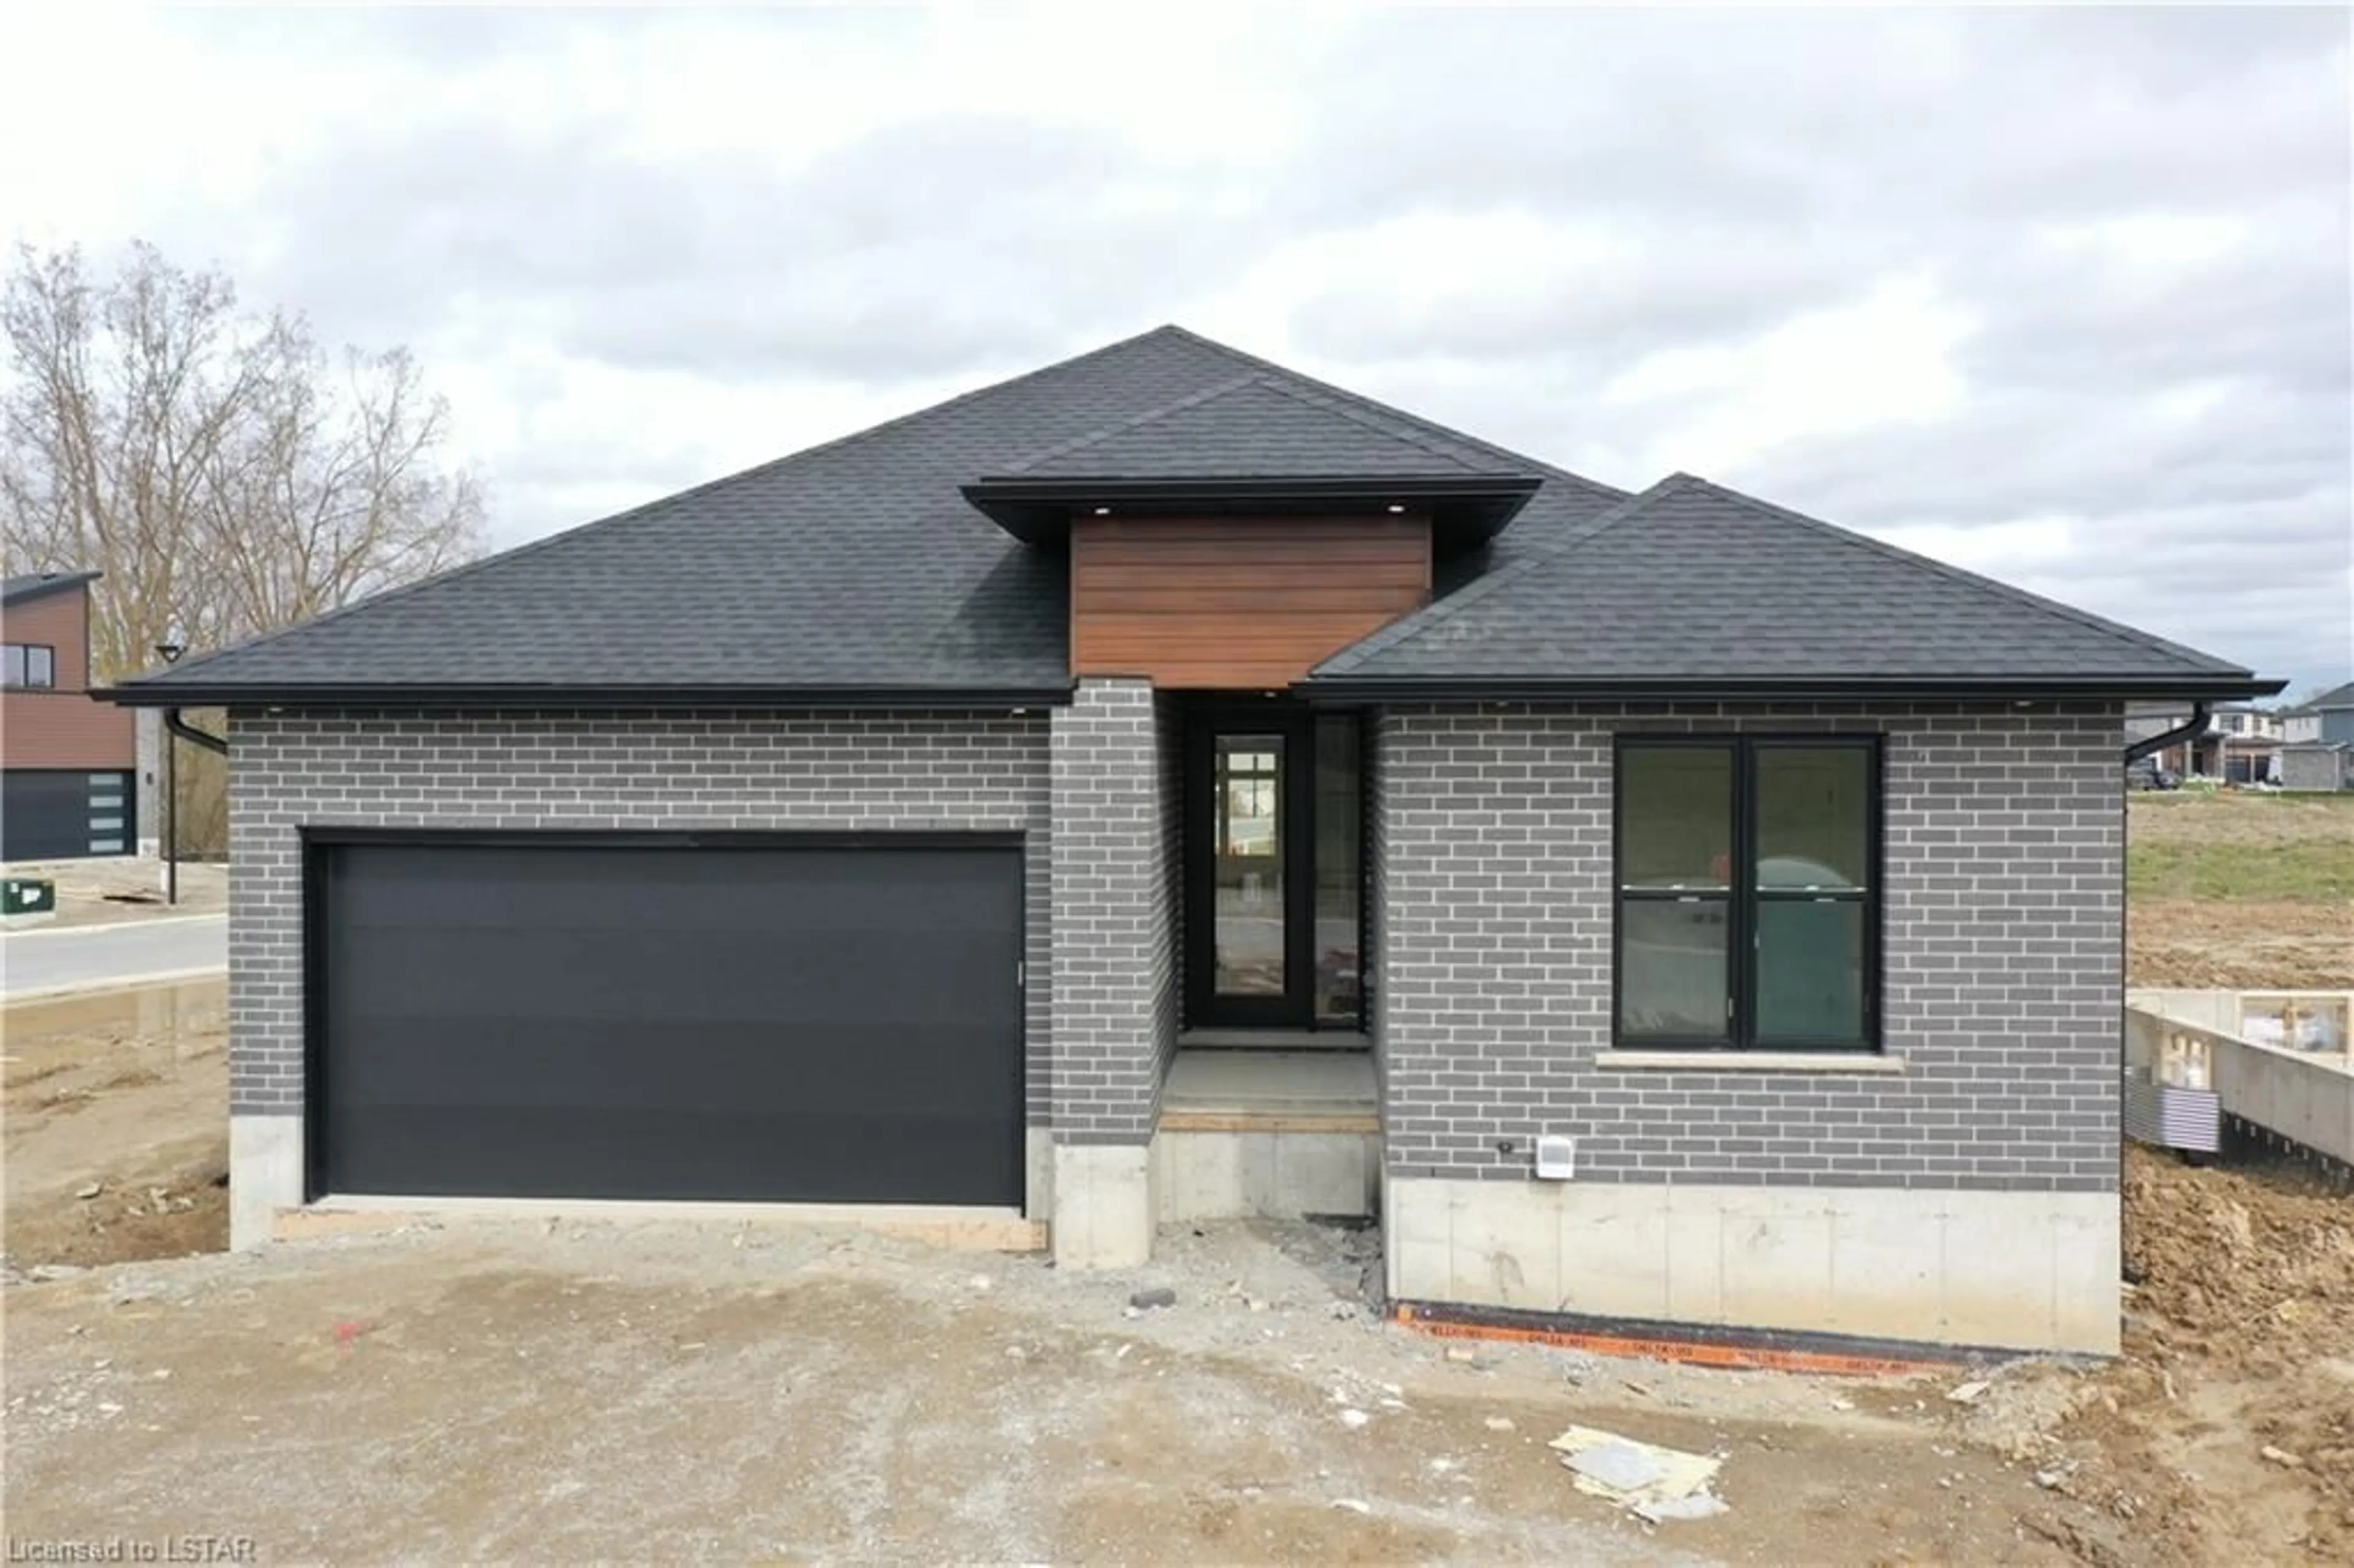 Home with brick exterior material for 141 Greene St, Exeter Ontario N0M 1S2